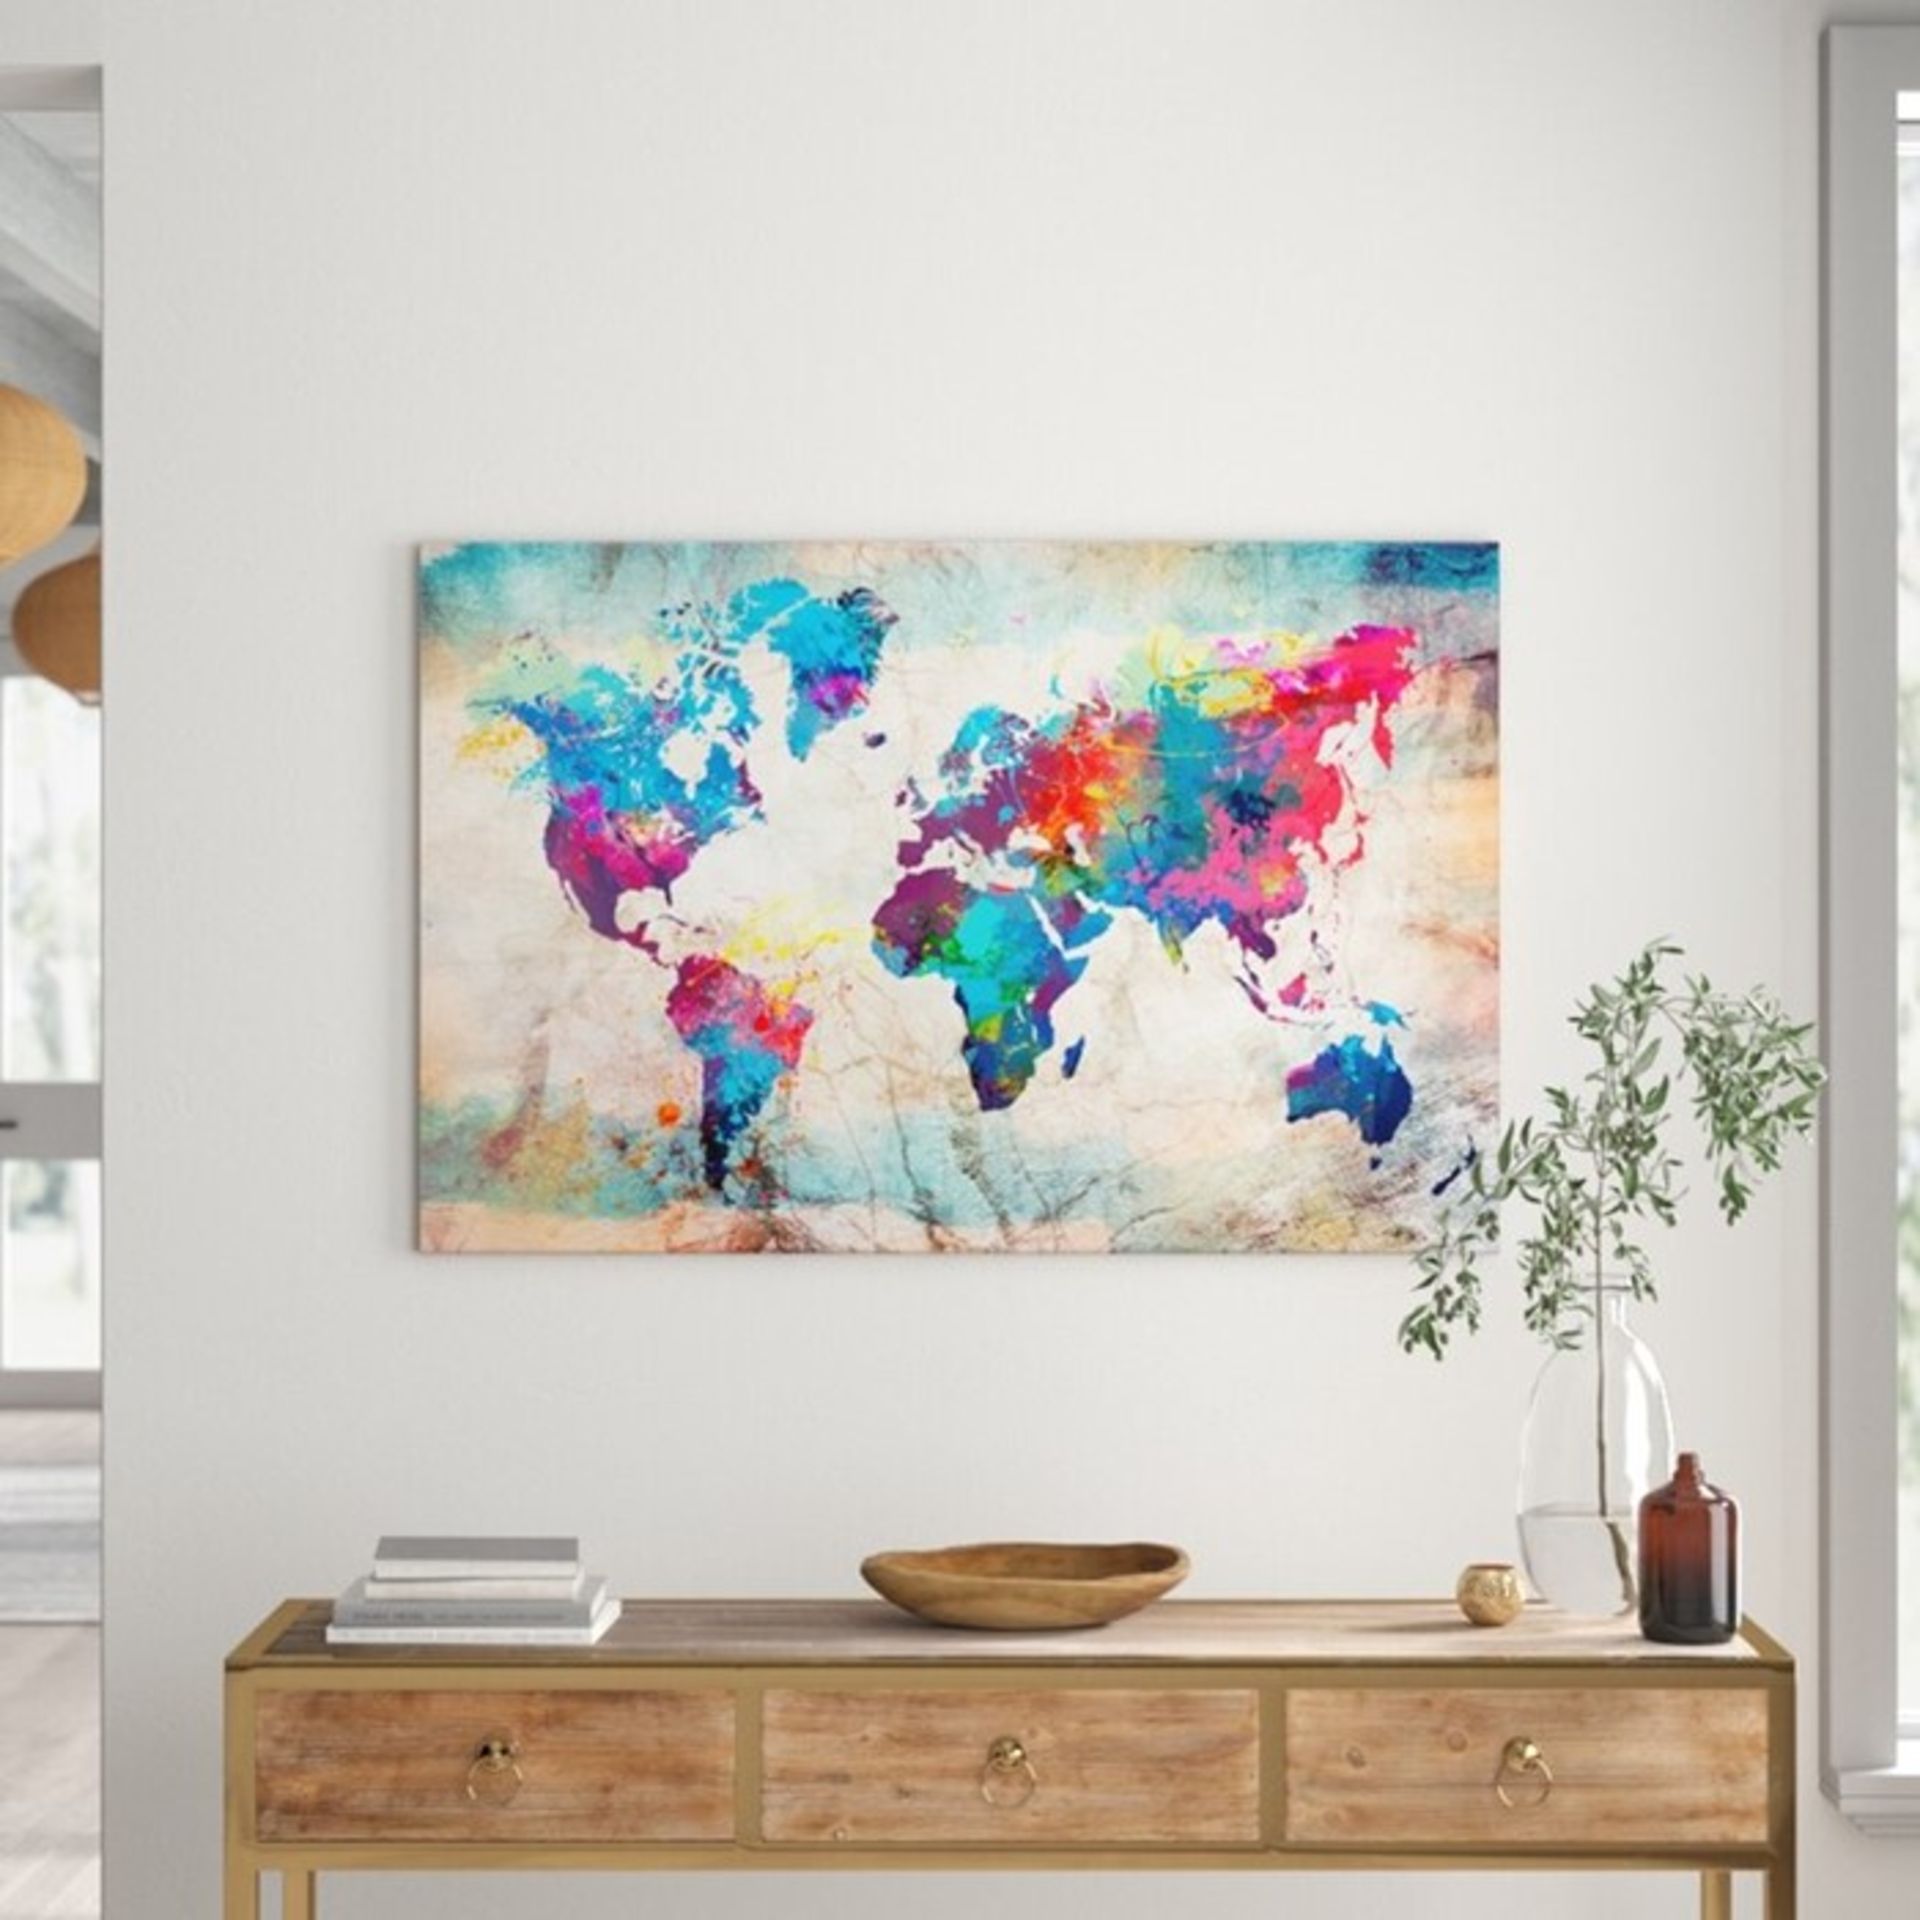 East Urban Home'World Map: Colourful Madness' Grap